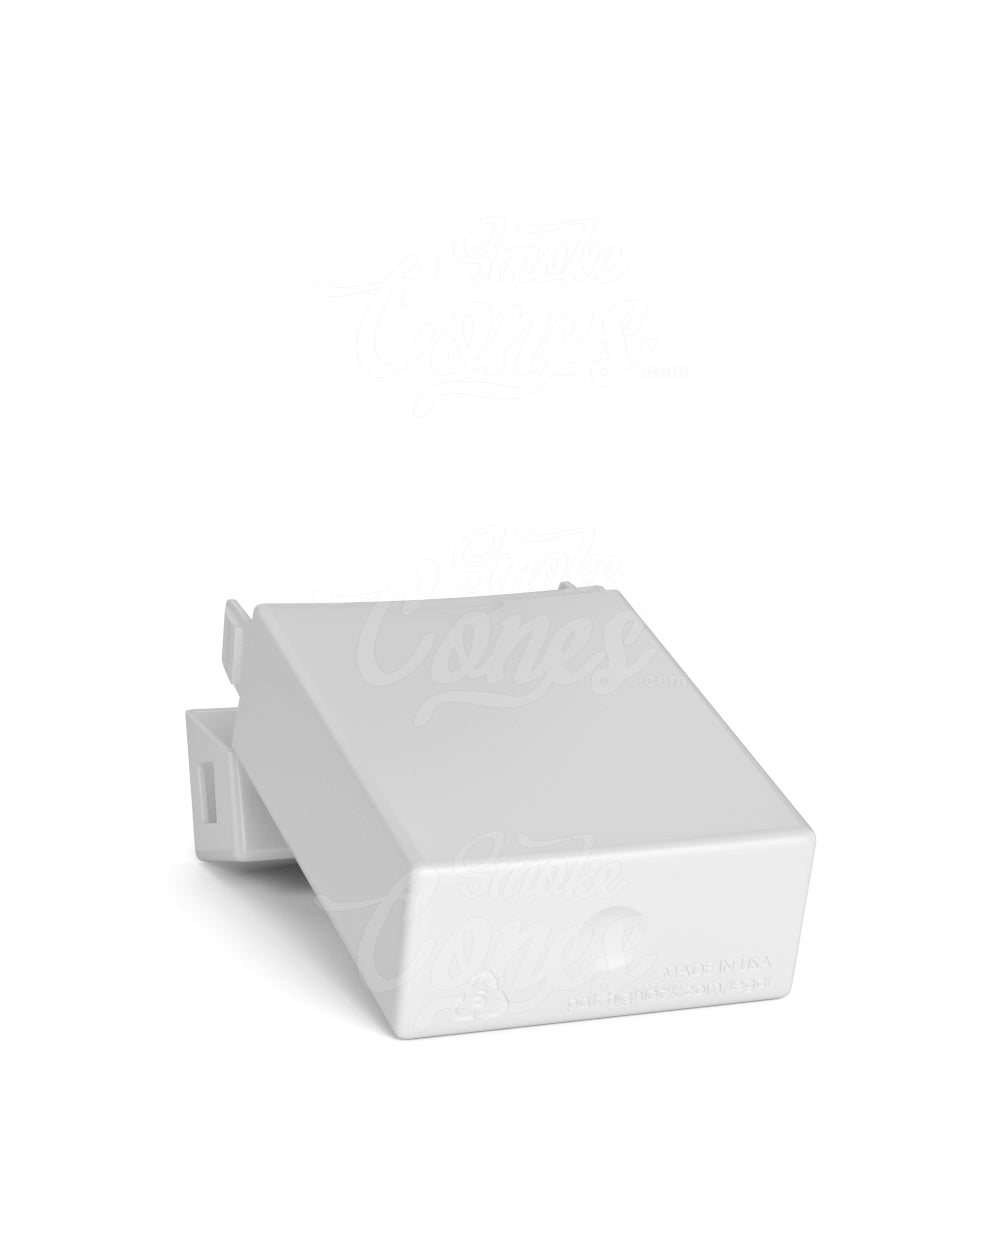 145mm Slim Discreet Recyclable White Cardboard CR Joint Case